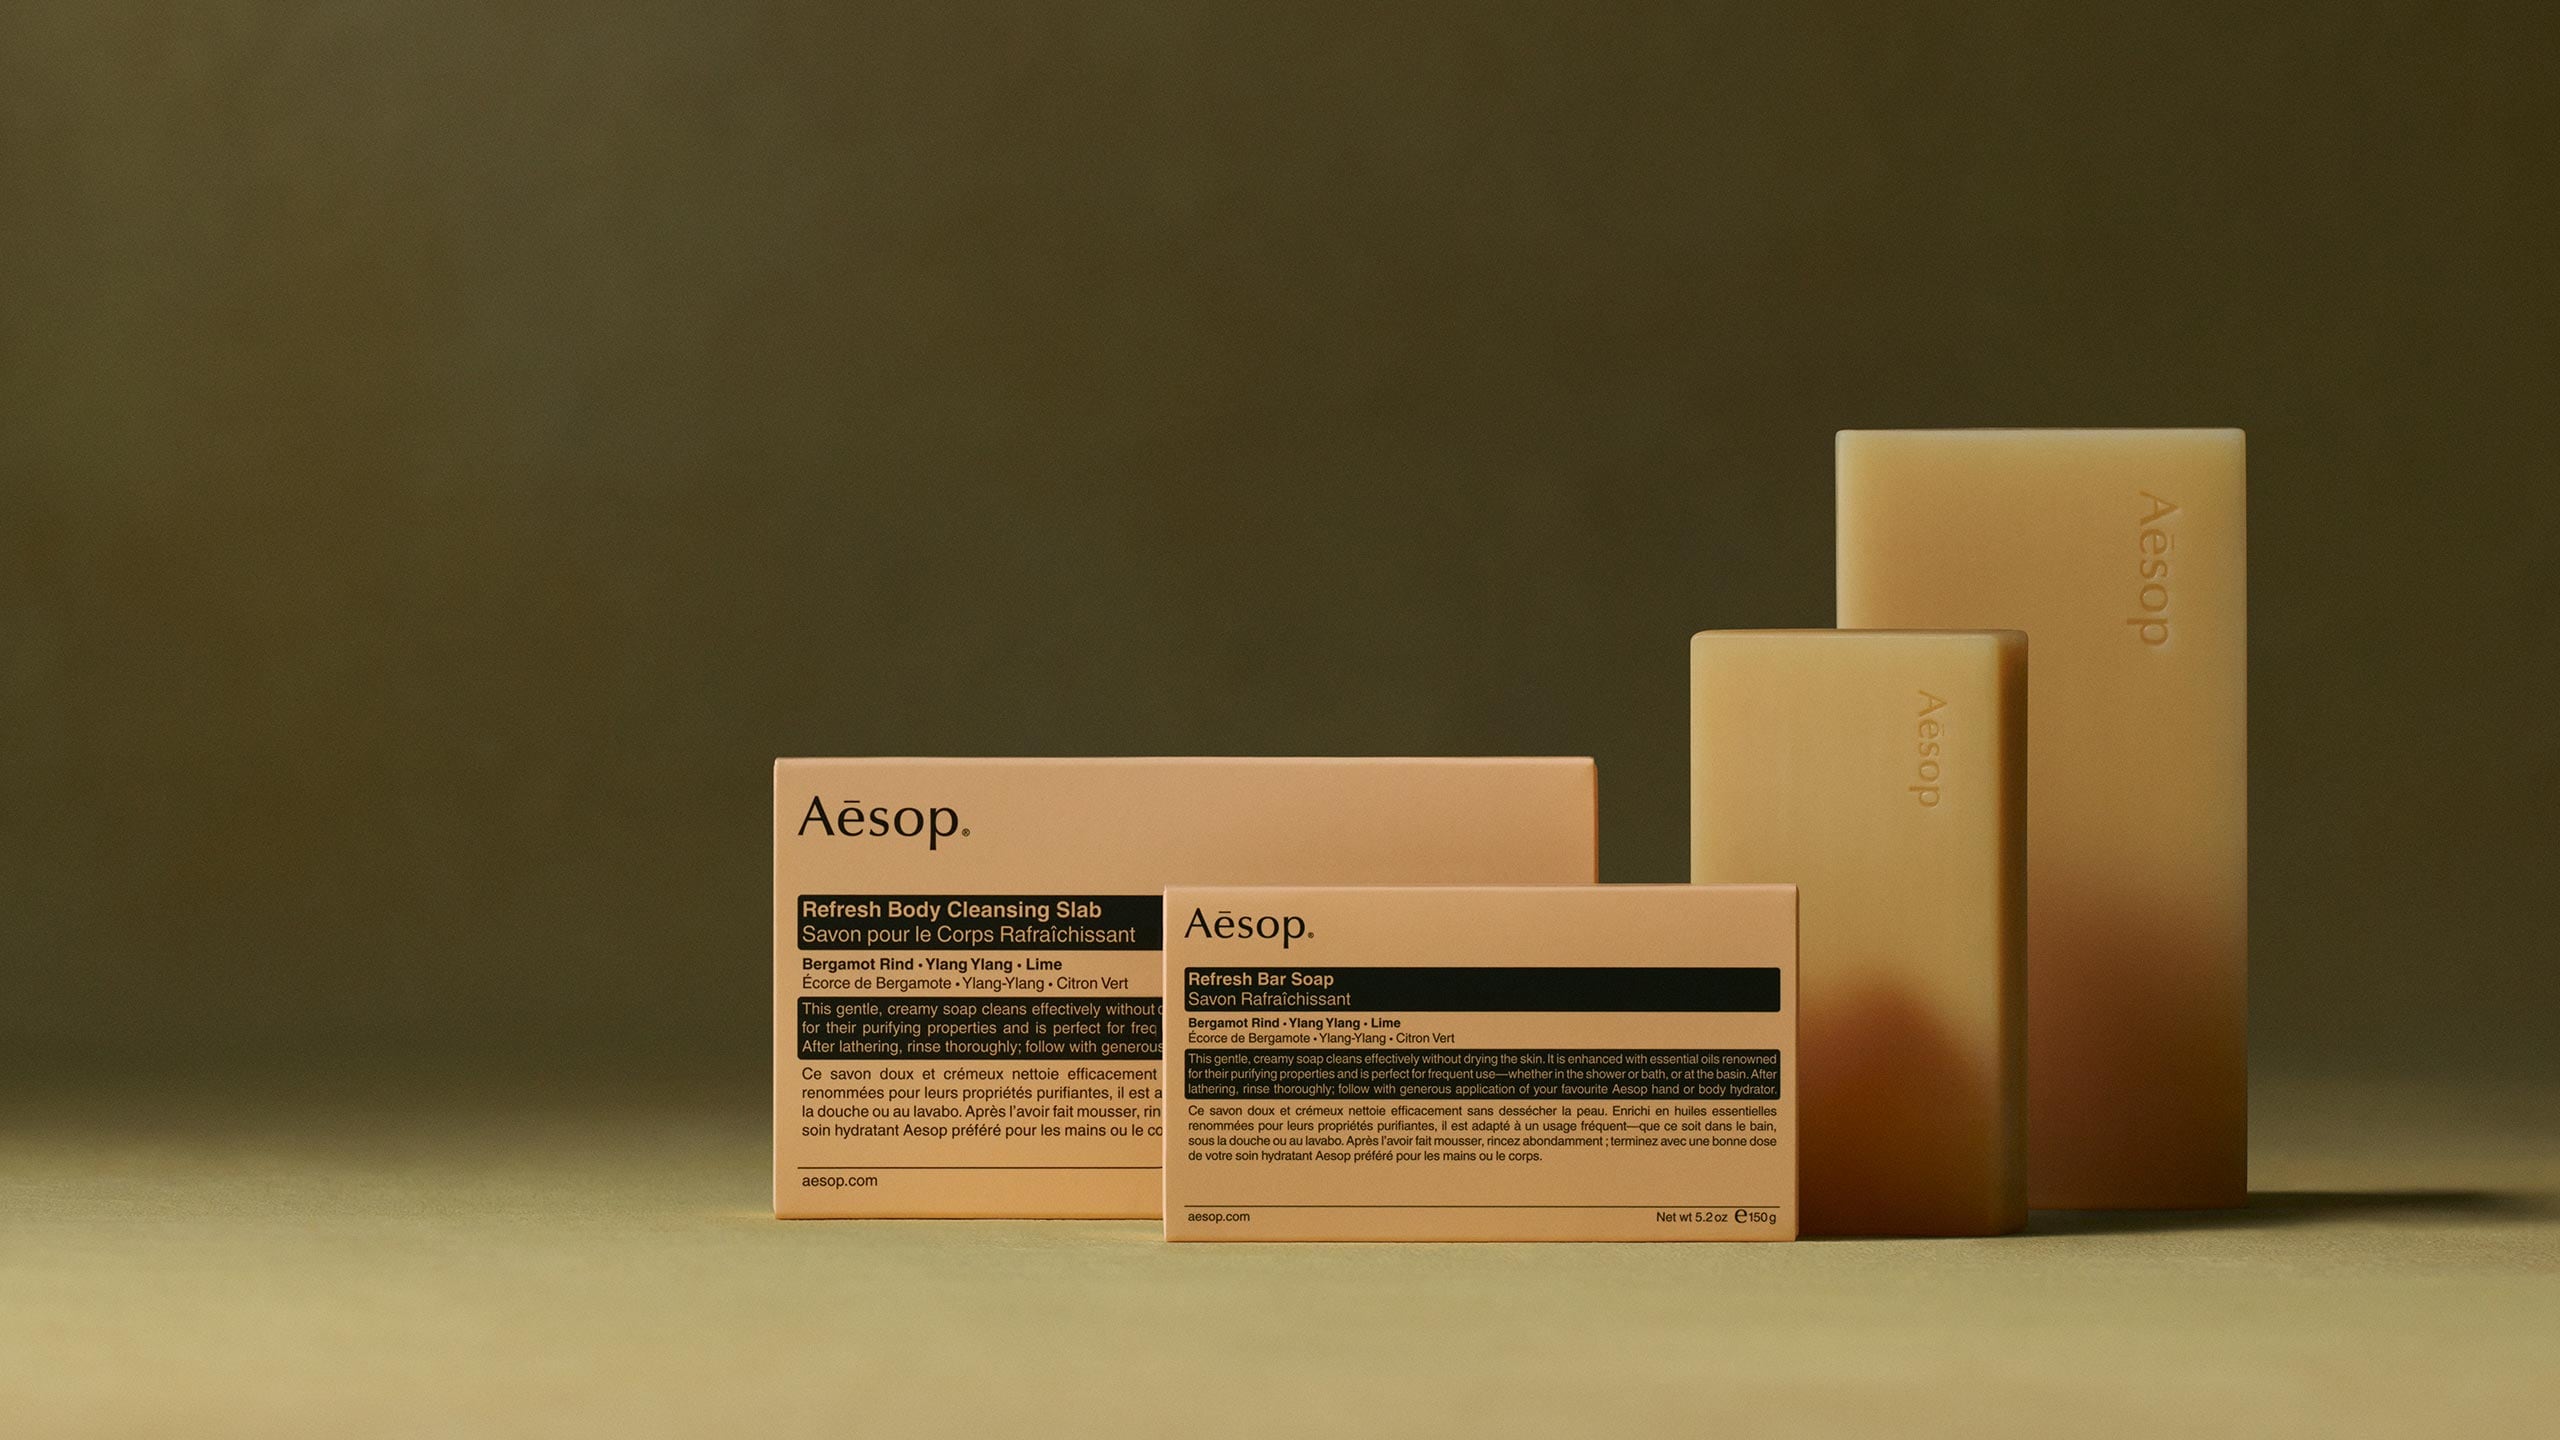 Aesop refresh bar soap and its packaging placed in front of a green textured background